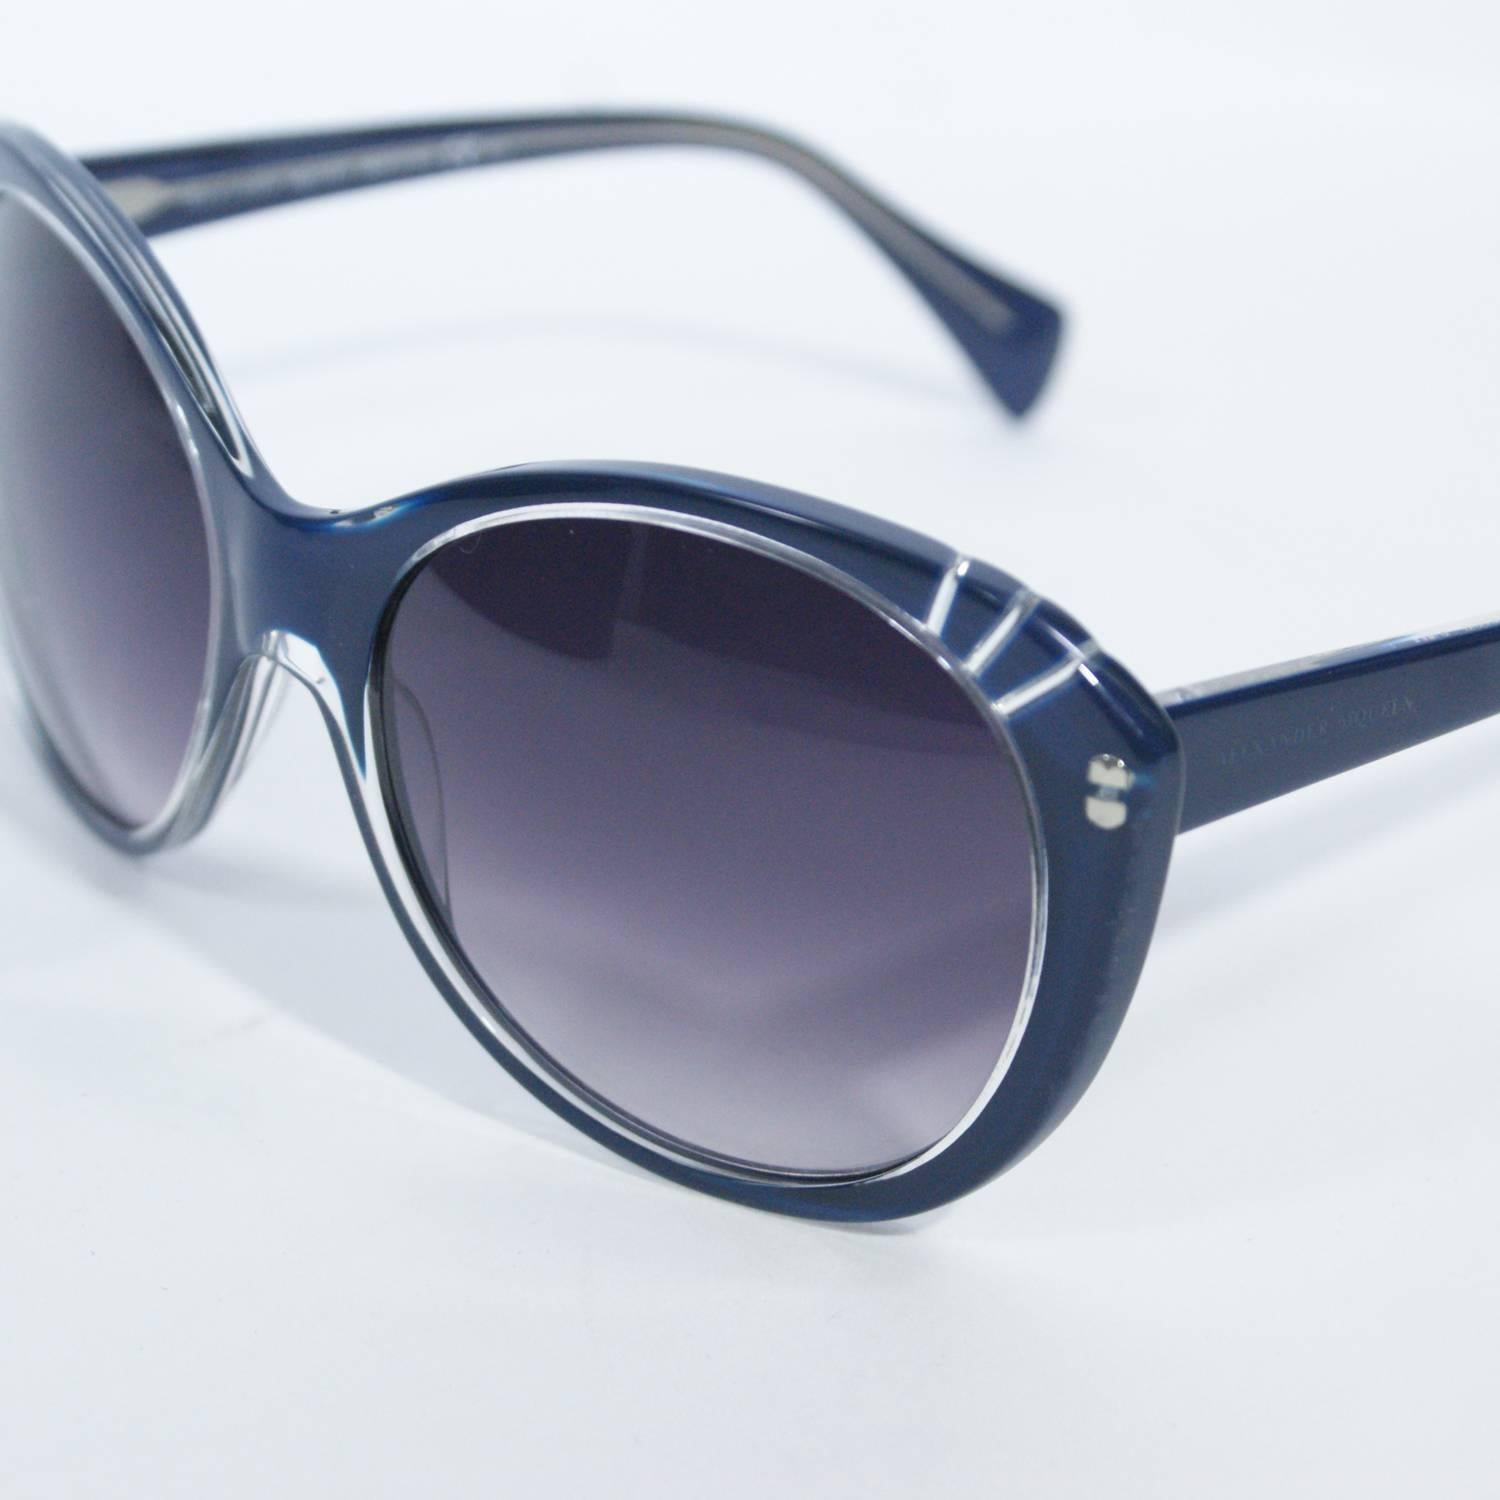 Alexander McQueen Navy Blue Sunglasses In Excellent Condition For Sale In Narberth, PA